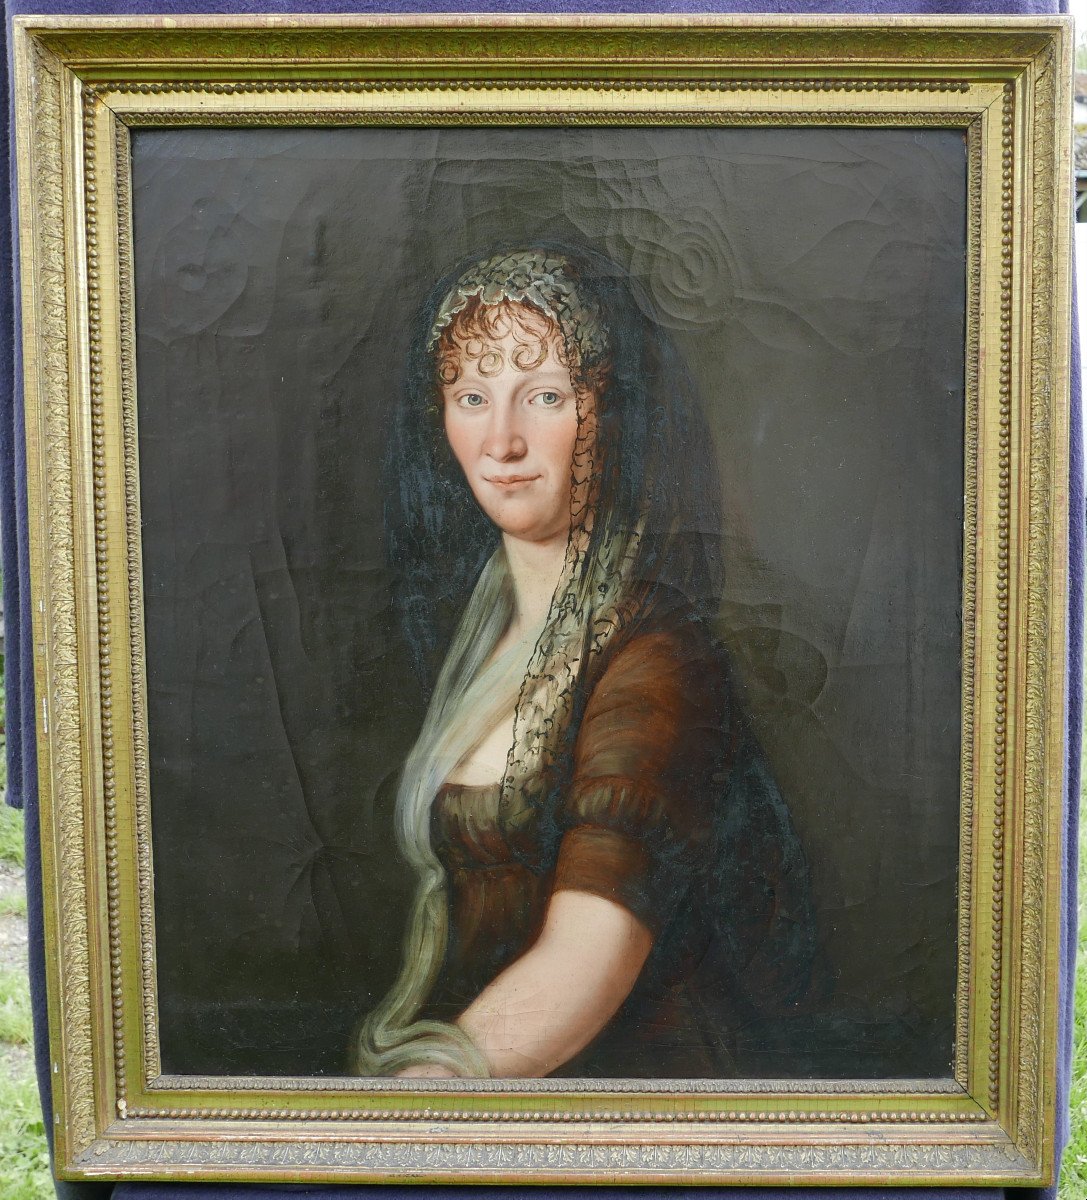 Large Portrait Of A Woman First Empire Period Oil/canvas Early 19th Century